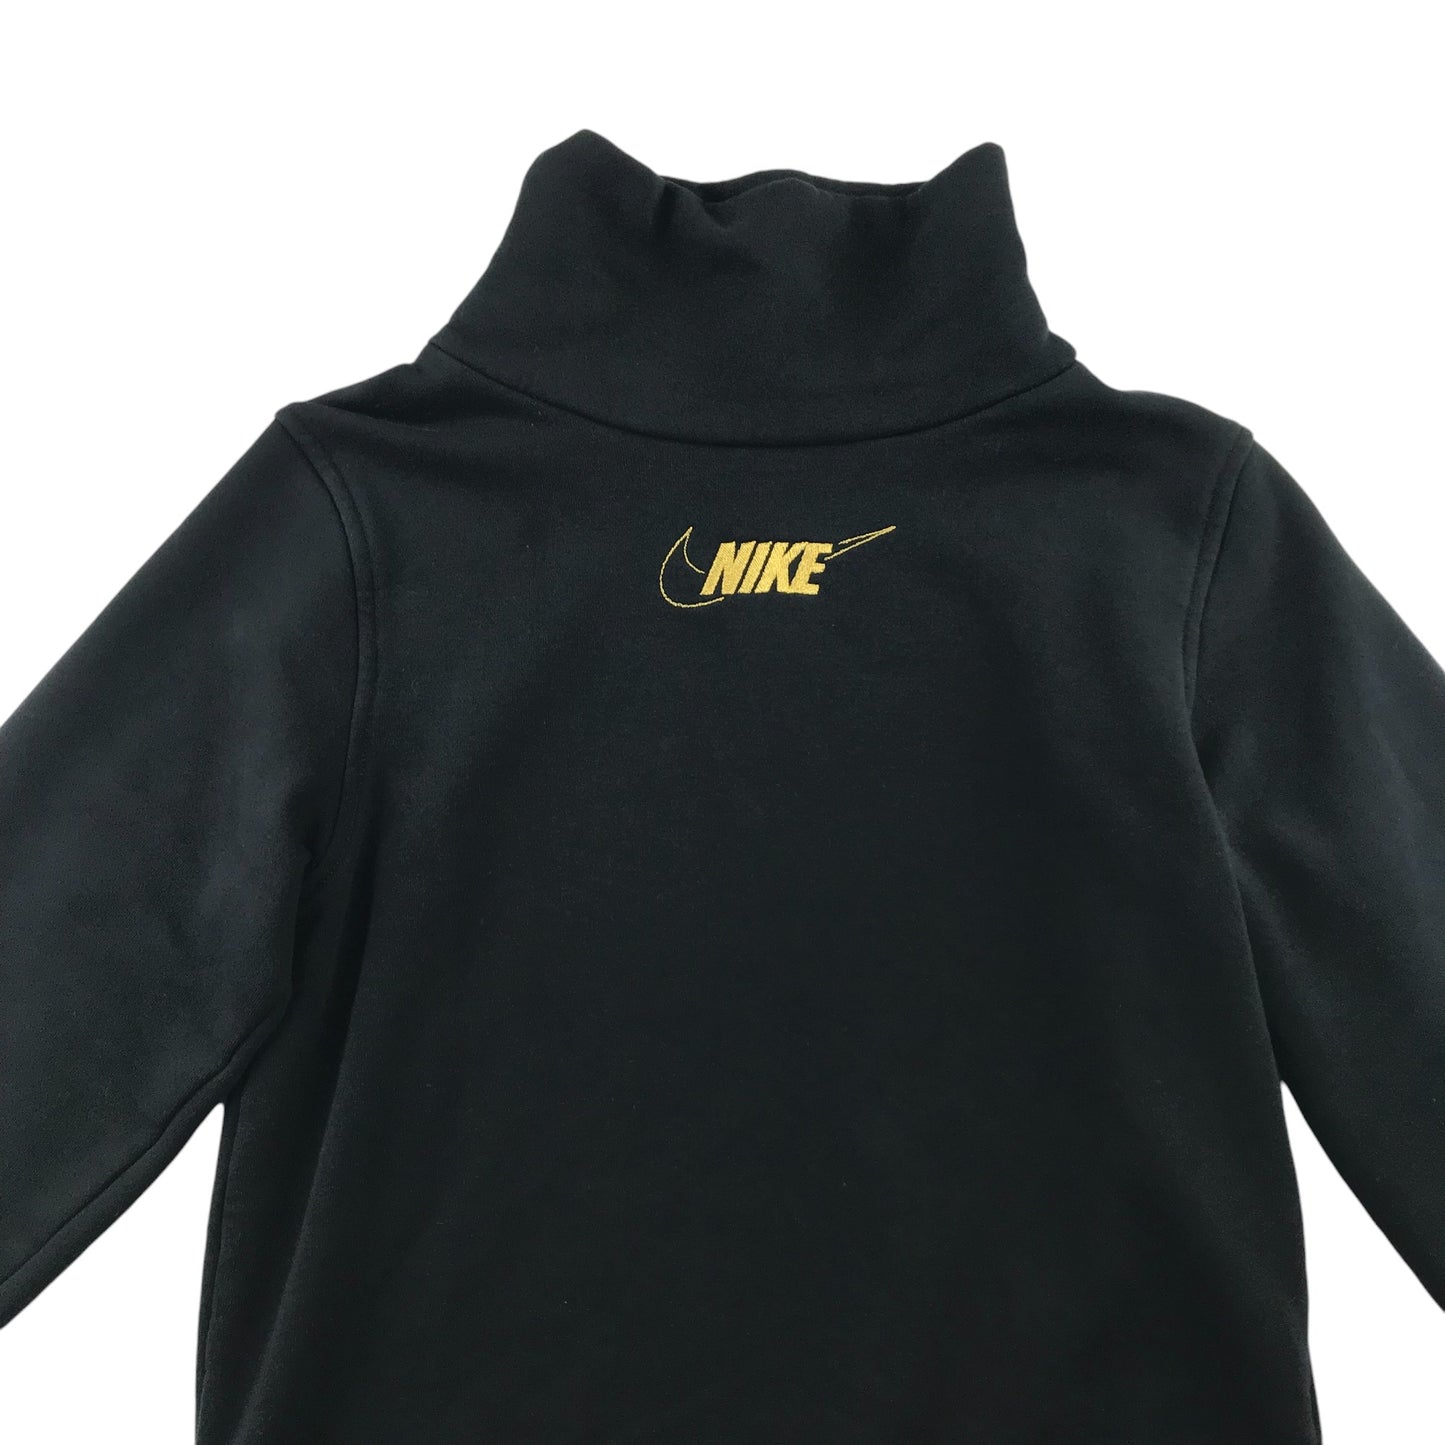 Nike sweater 10-11 years black turtle neck gold logo and details